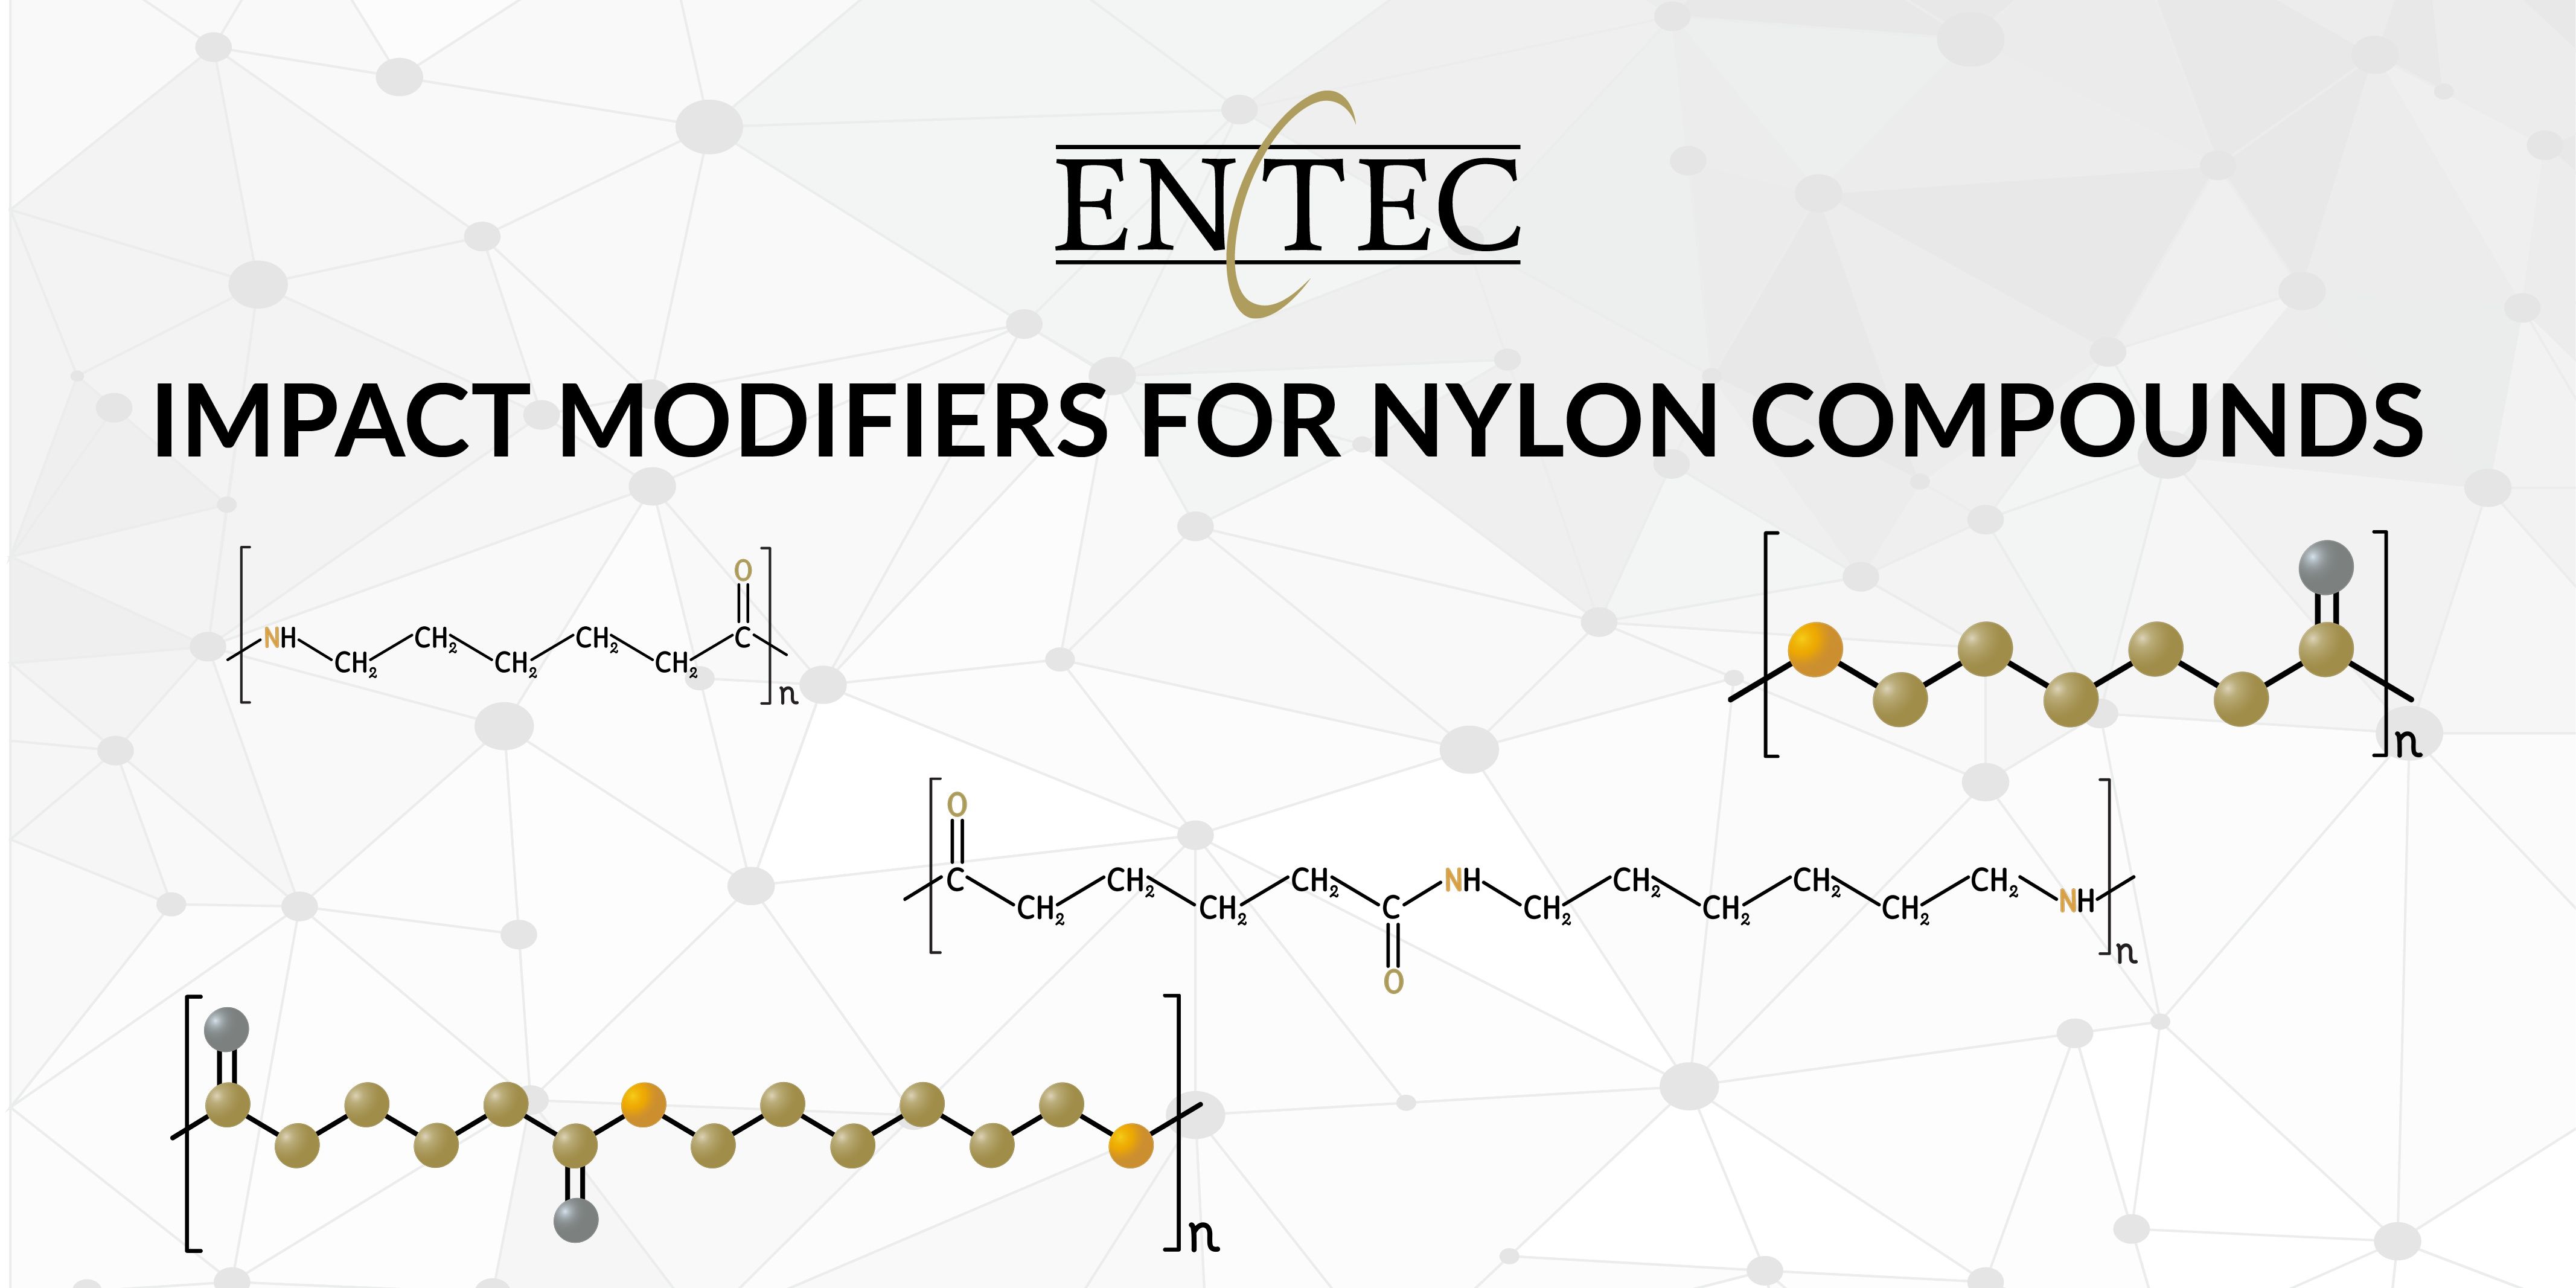 Impact Modifiers for Nylon Compounds Social Media Post